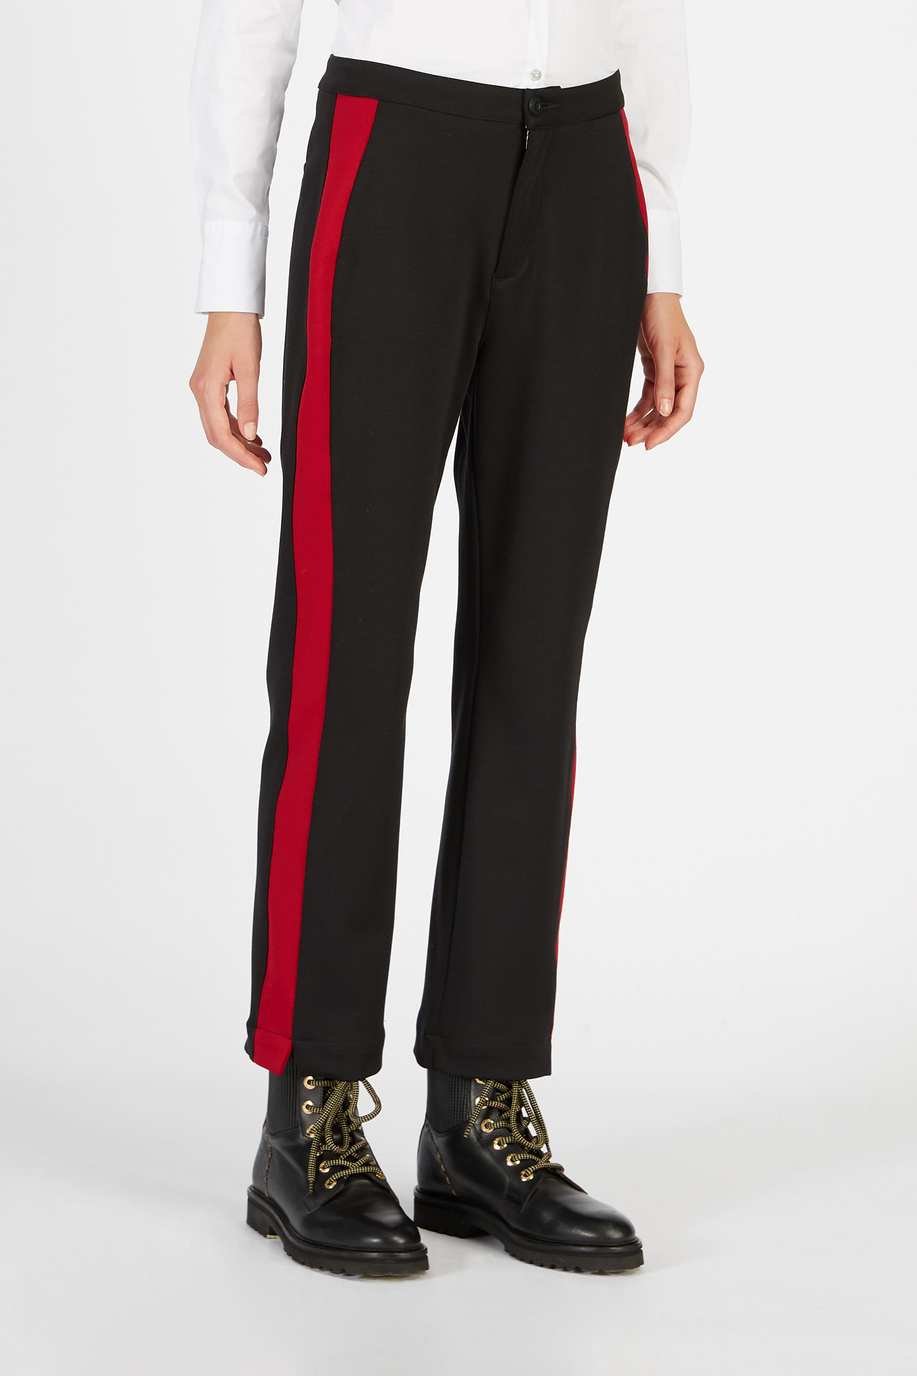 Women’s high-waisted trousers with narrow bottom - Elegant looks for her | La Martina - Official Online Shop